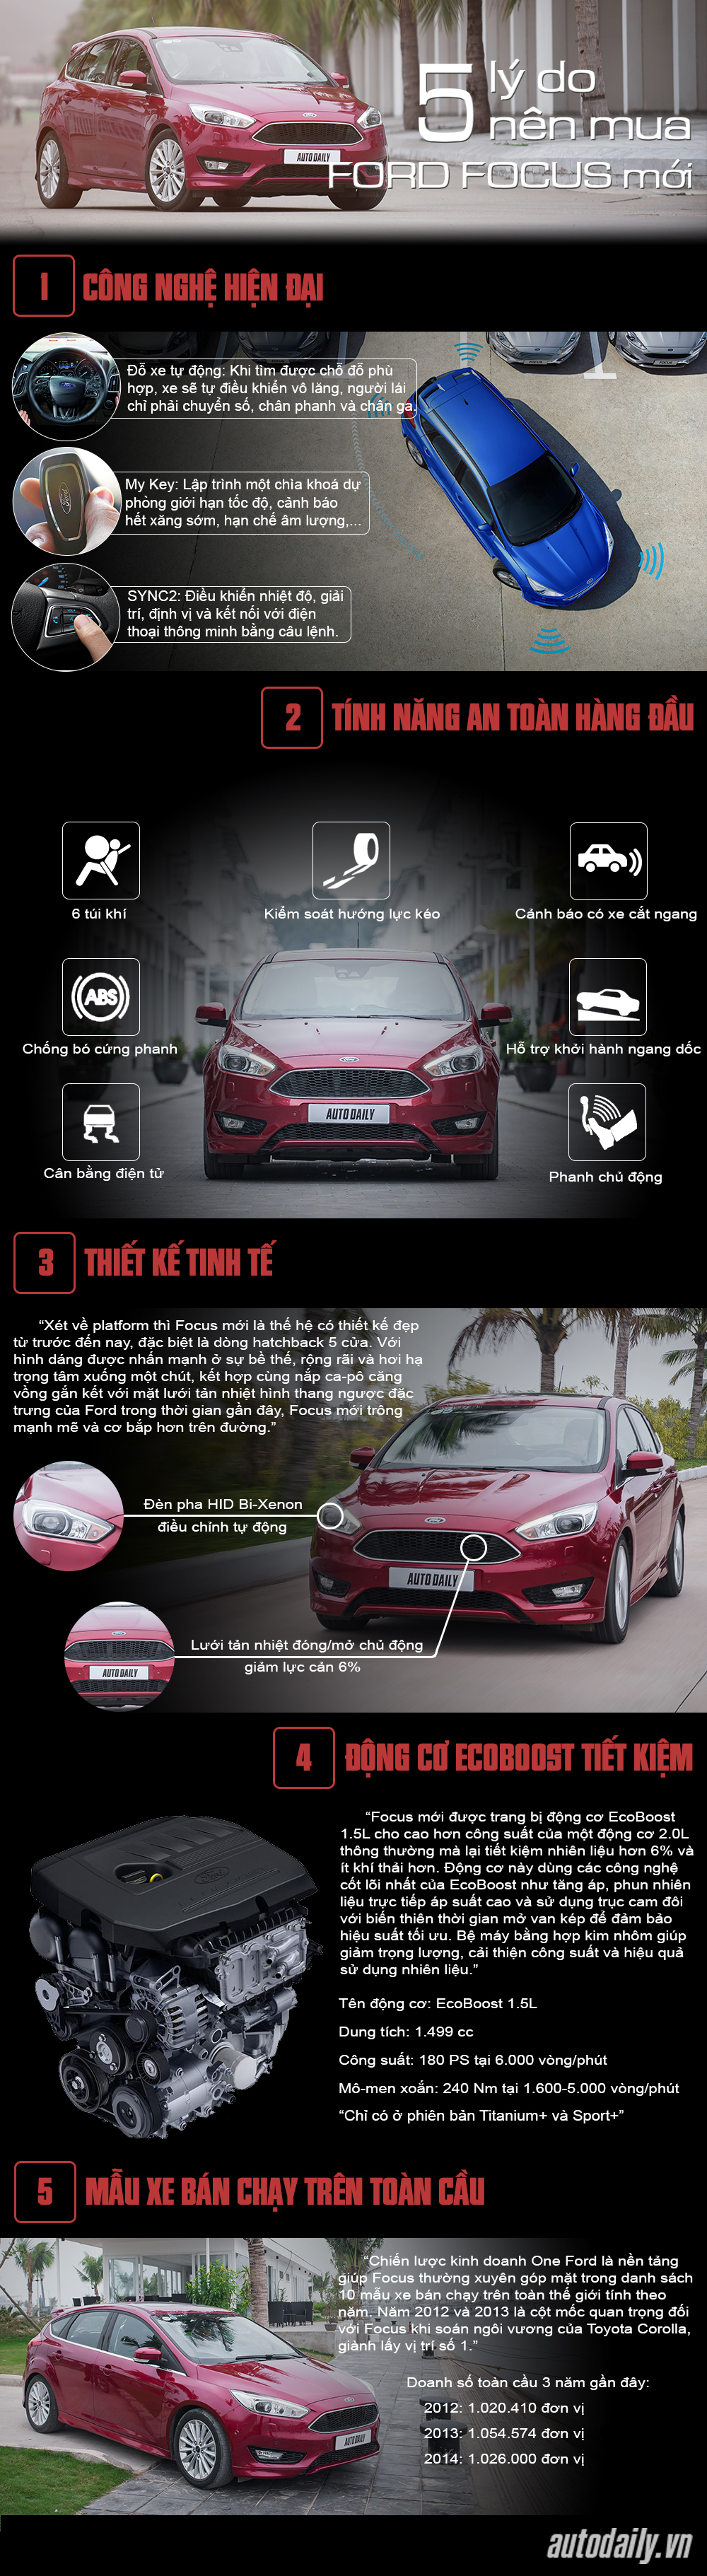 Infographic_Ford_Focus_Edited.jpg